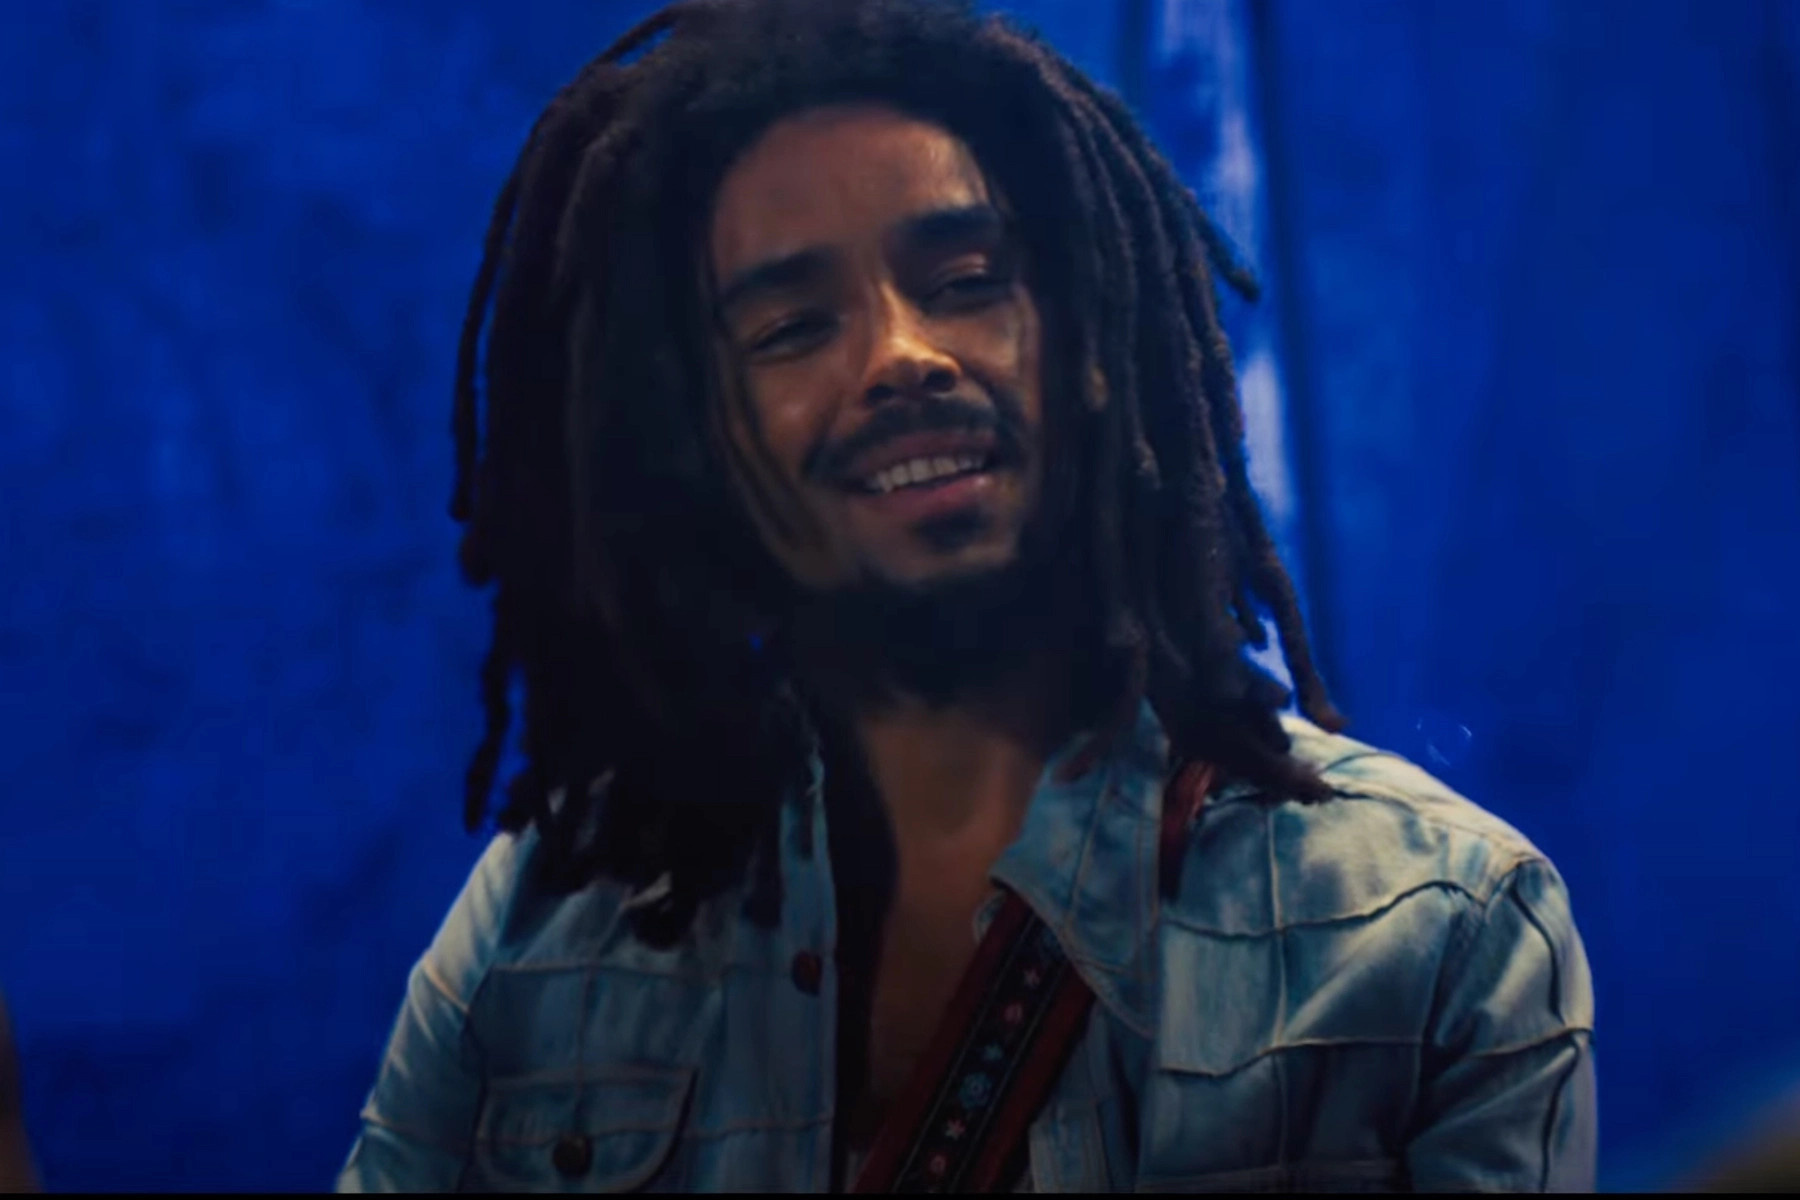 Bob Marley One Love the biopic of the reggae legend unveils its